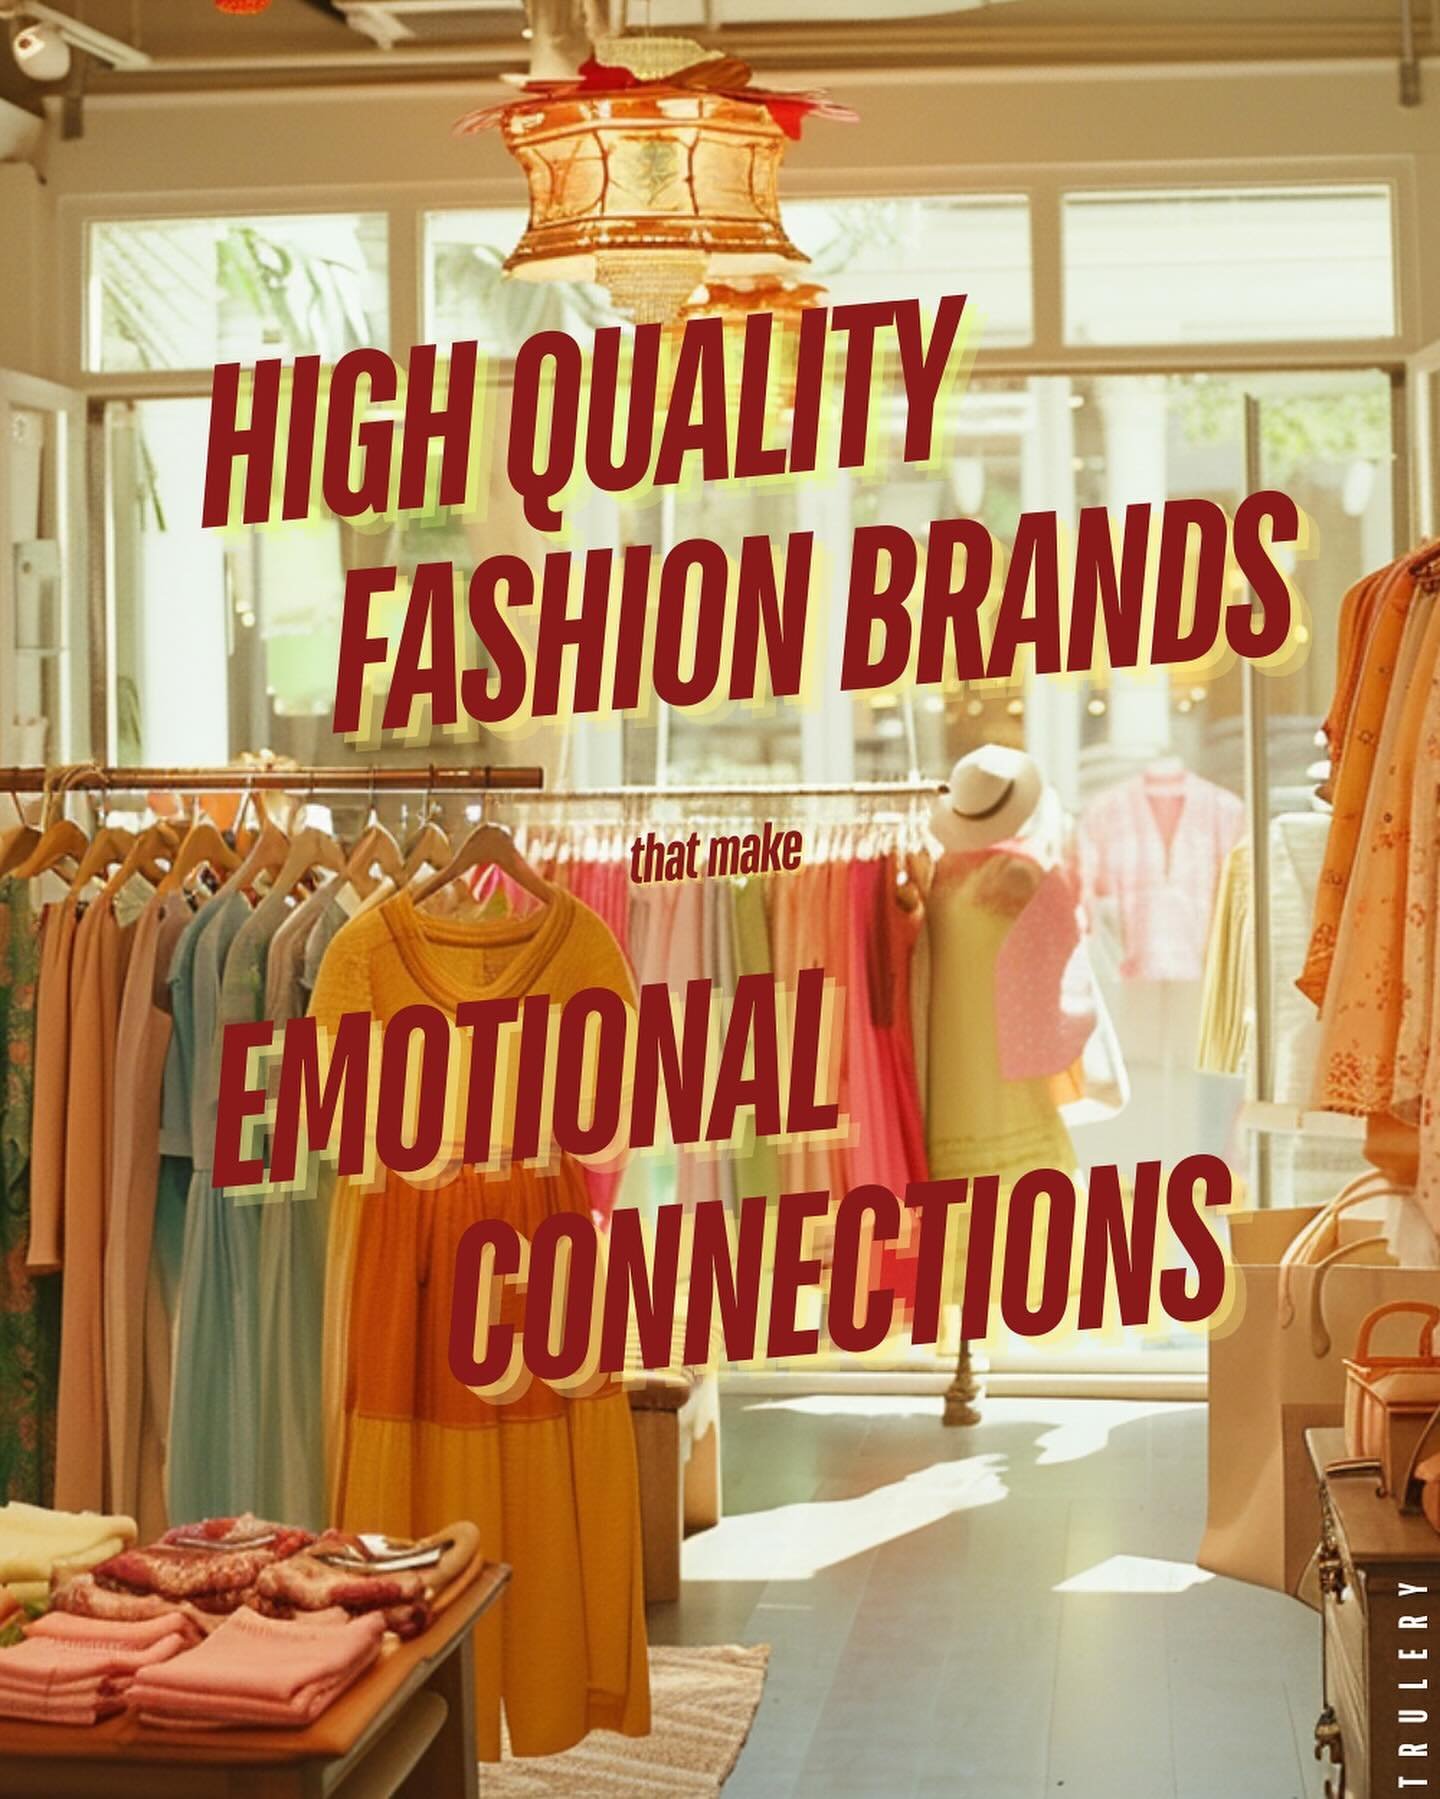 📸 by me via Midjourney

Assessed  4 distinctive brands: @maryam_nassir_zadeh @byfar_official @christydawn @tuckernuck to see what emotional branding strategies they used and what we can learn from them.

Do you only shop clothing brands you connect 